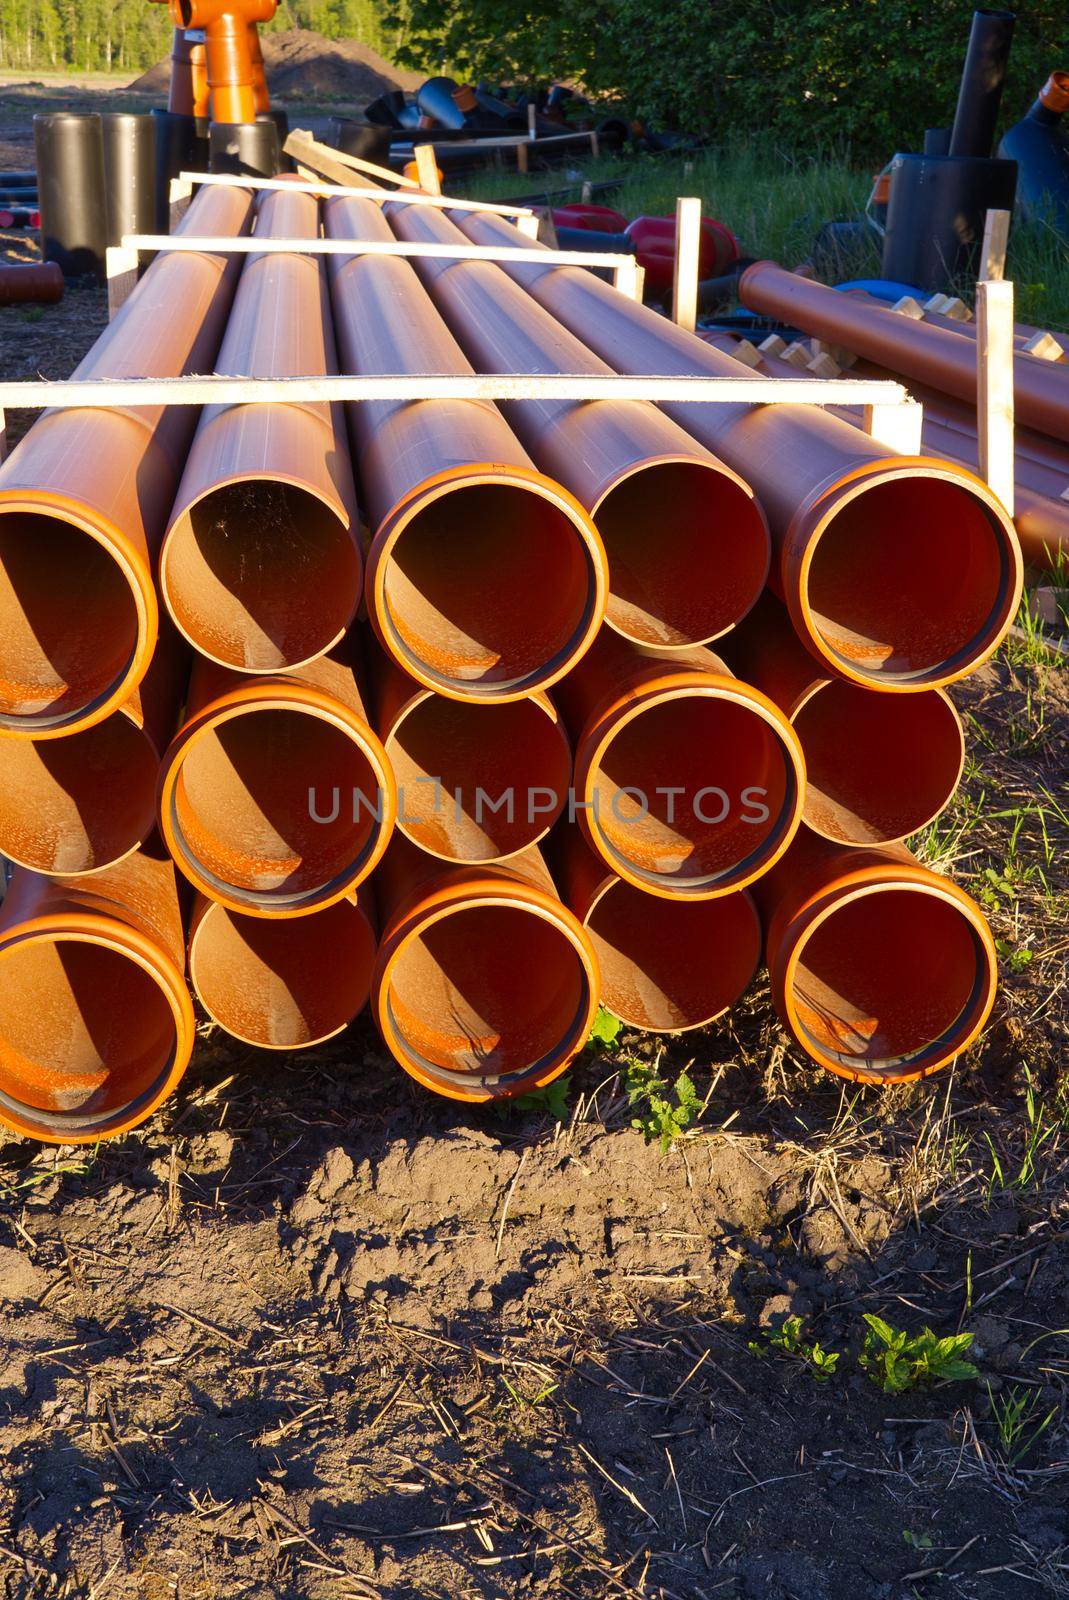 sewer orange pvc pipes stacked on construction site. plumbing plastic pipes.